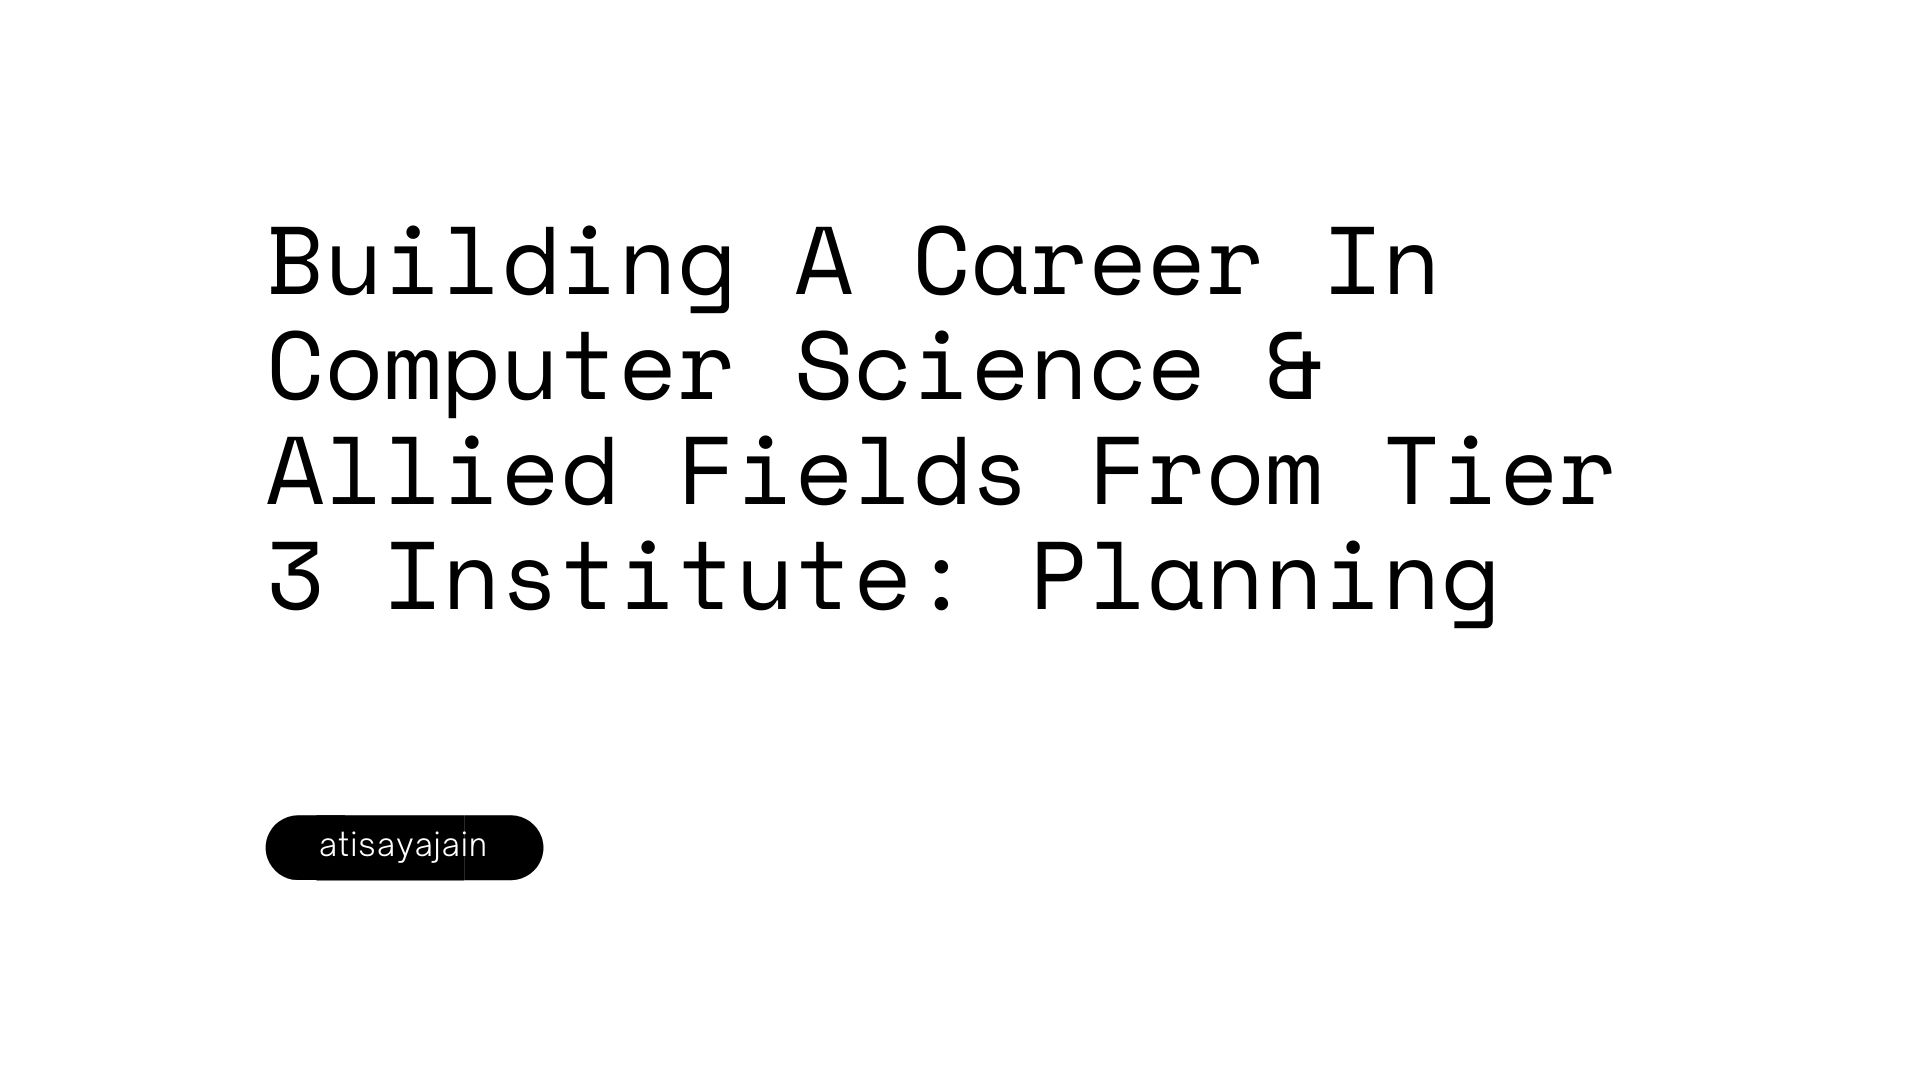 Building A Career In Computer Science & Allied Fields From Tier 3 Institute: Planning - Header